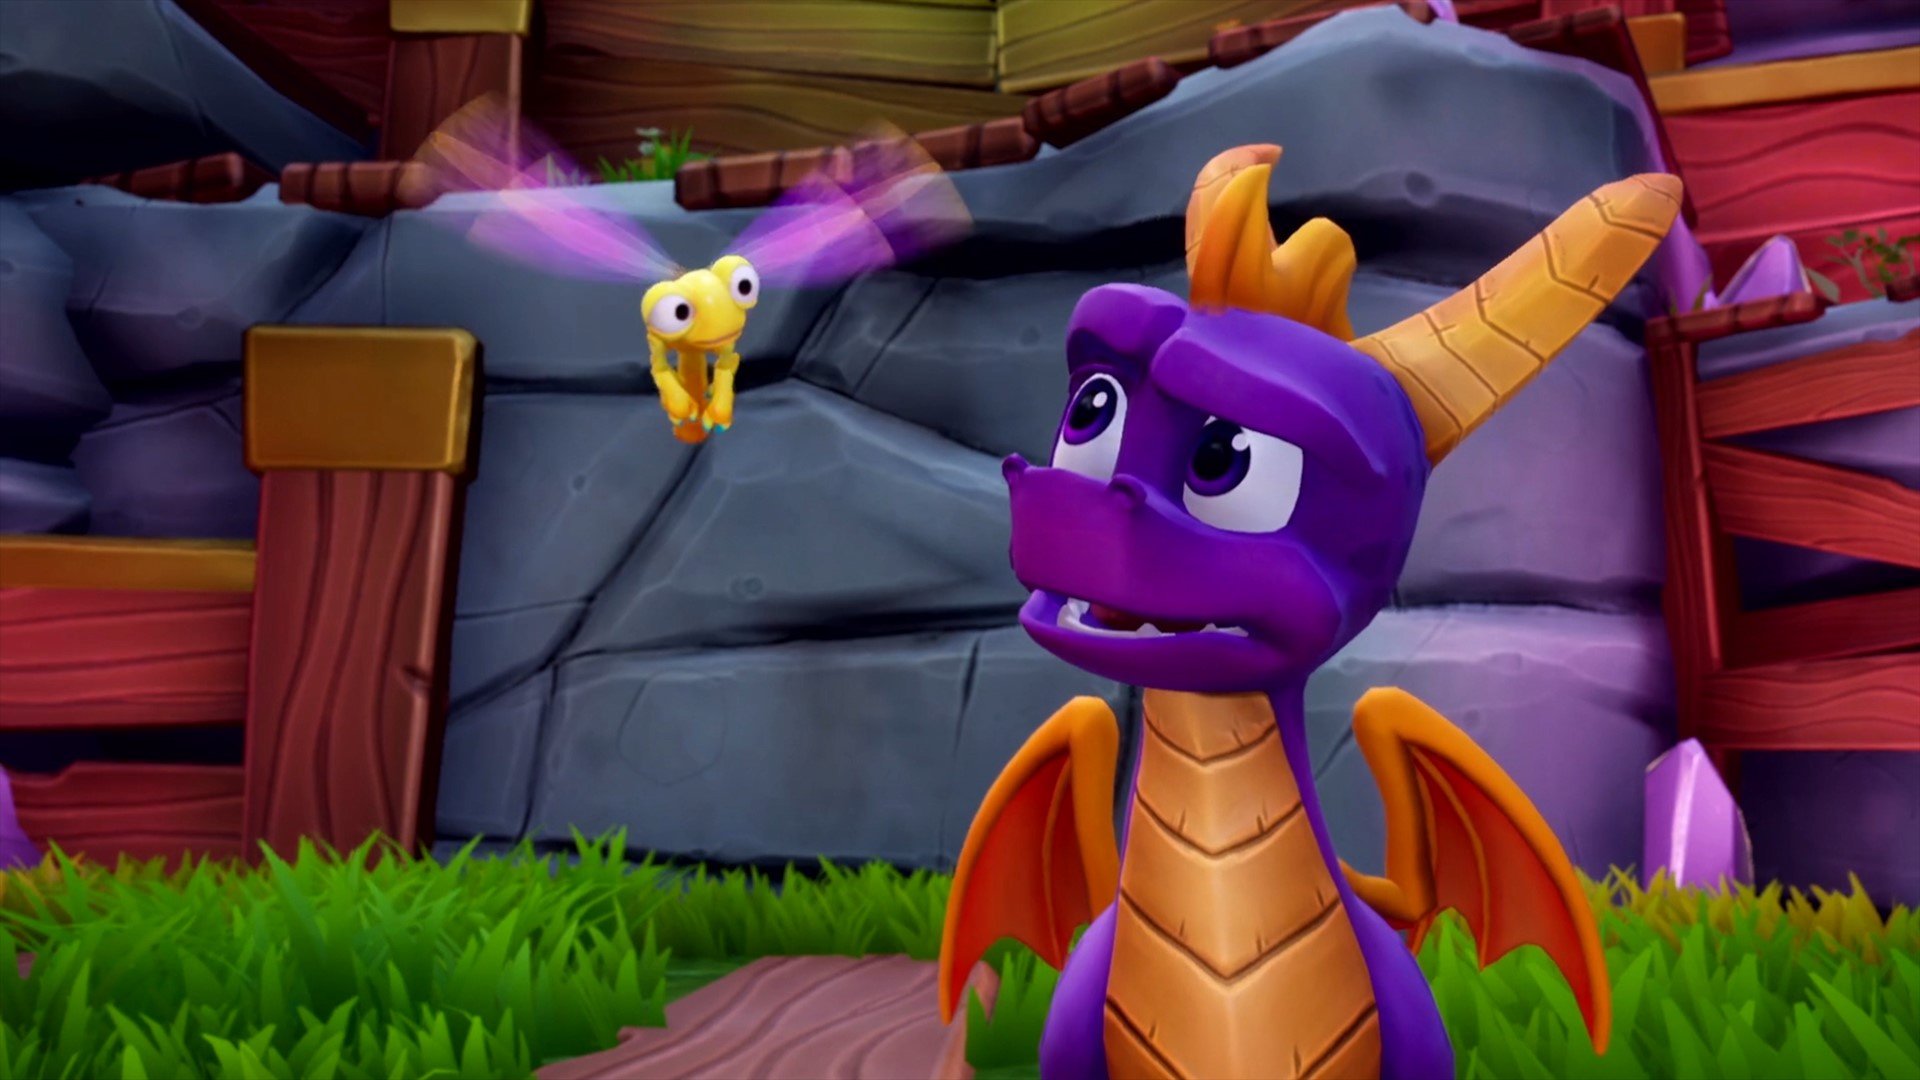 Activision thinks that subtitles aren’t a necessity for Spyro Reignited Trilogy